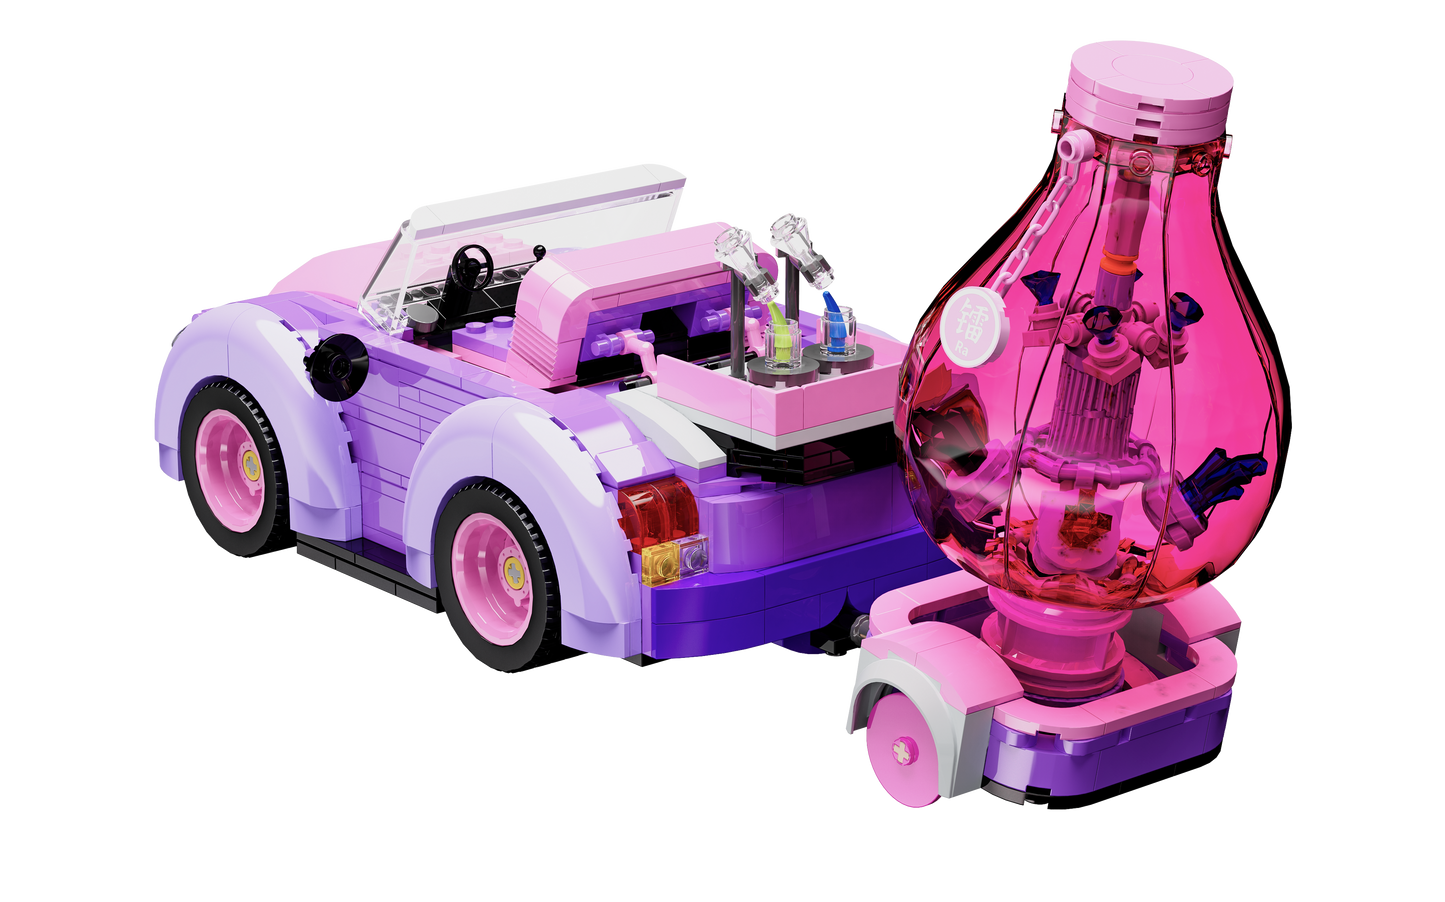 Magic Curie APP controled vehicle Stem Toy Kit for Girls 6+ Years old